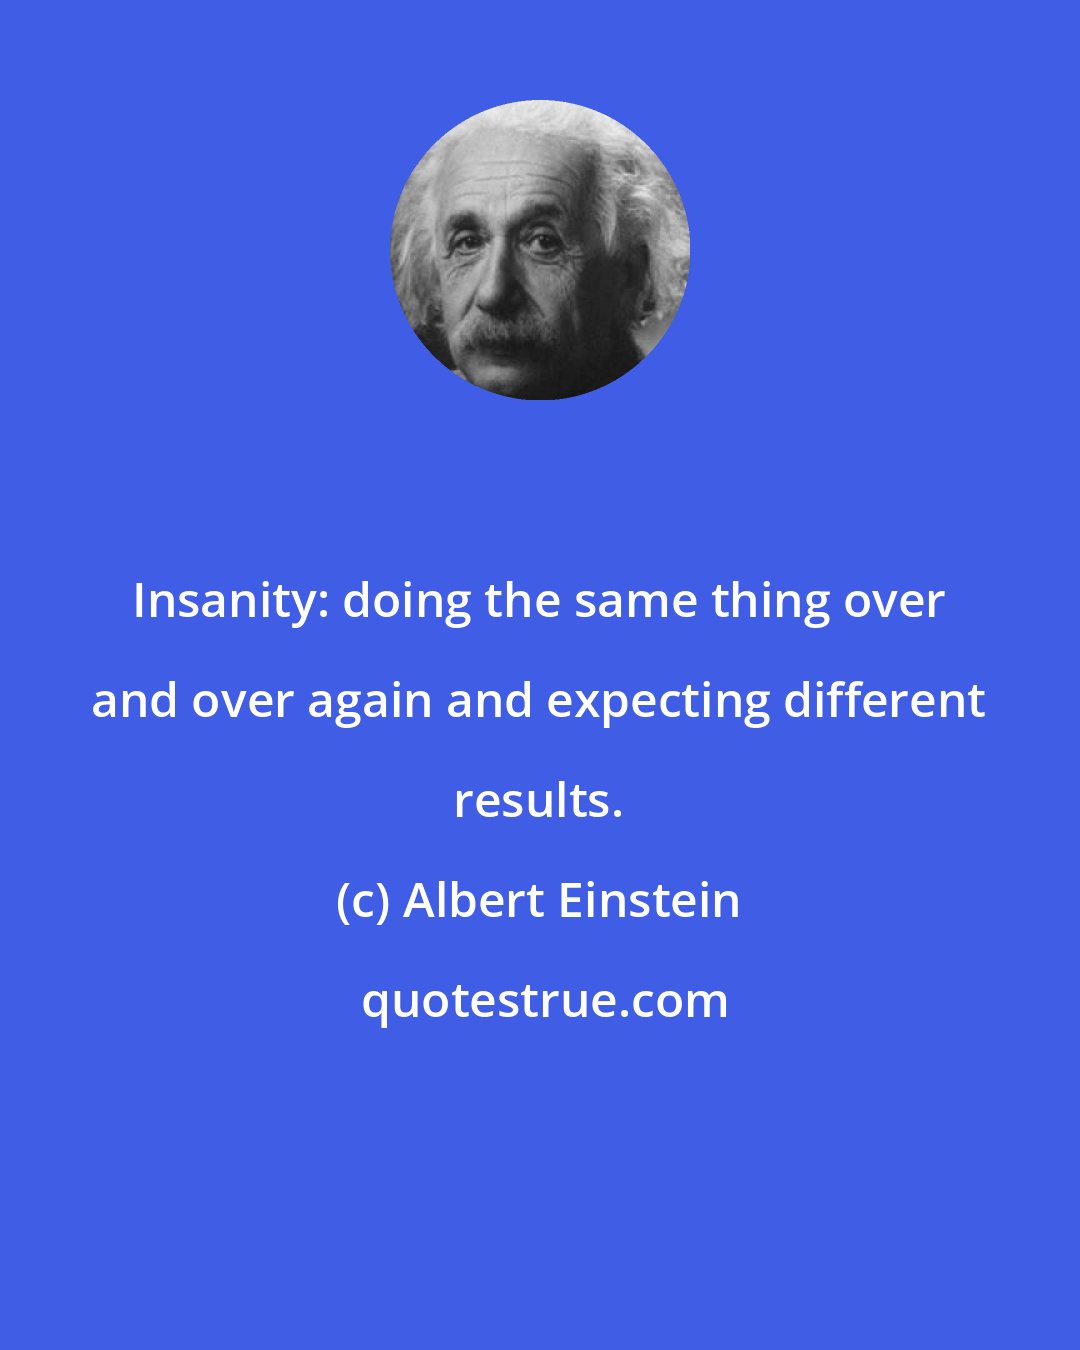 Albert Einstein: Insanity: doing the same thing over and over again and expecting different results.